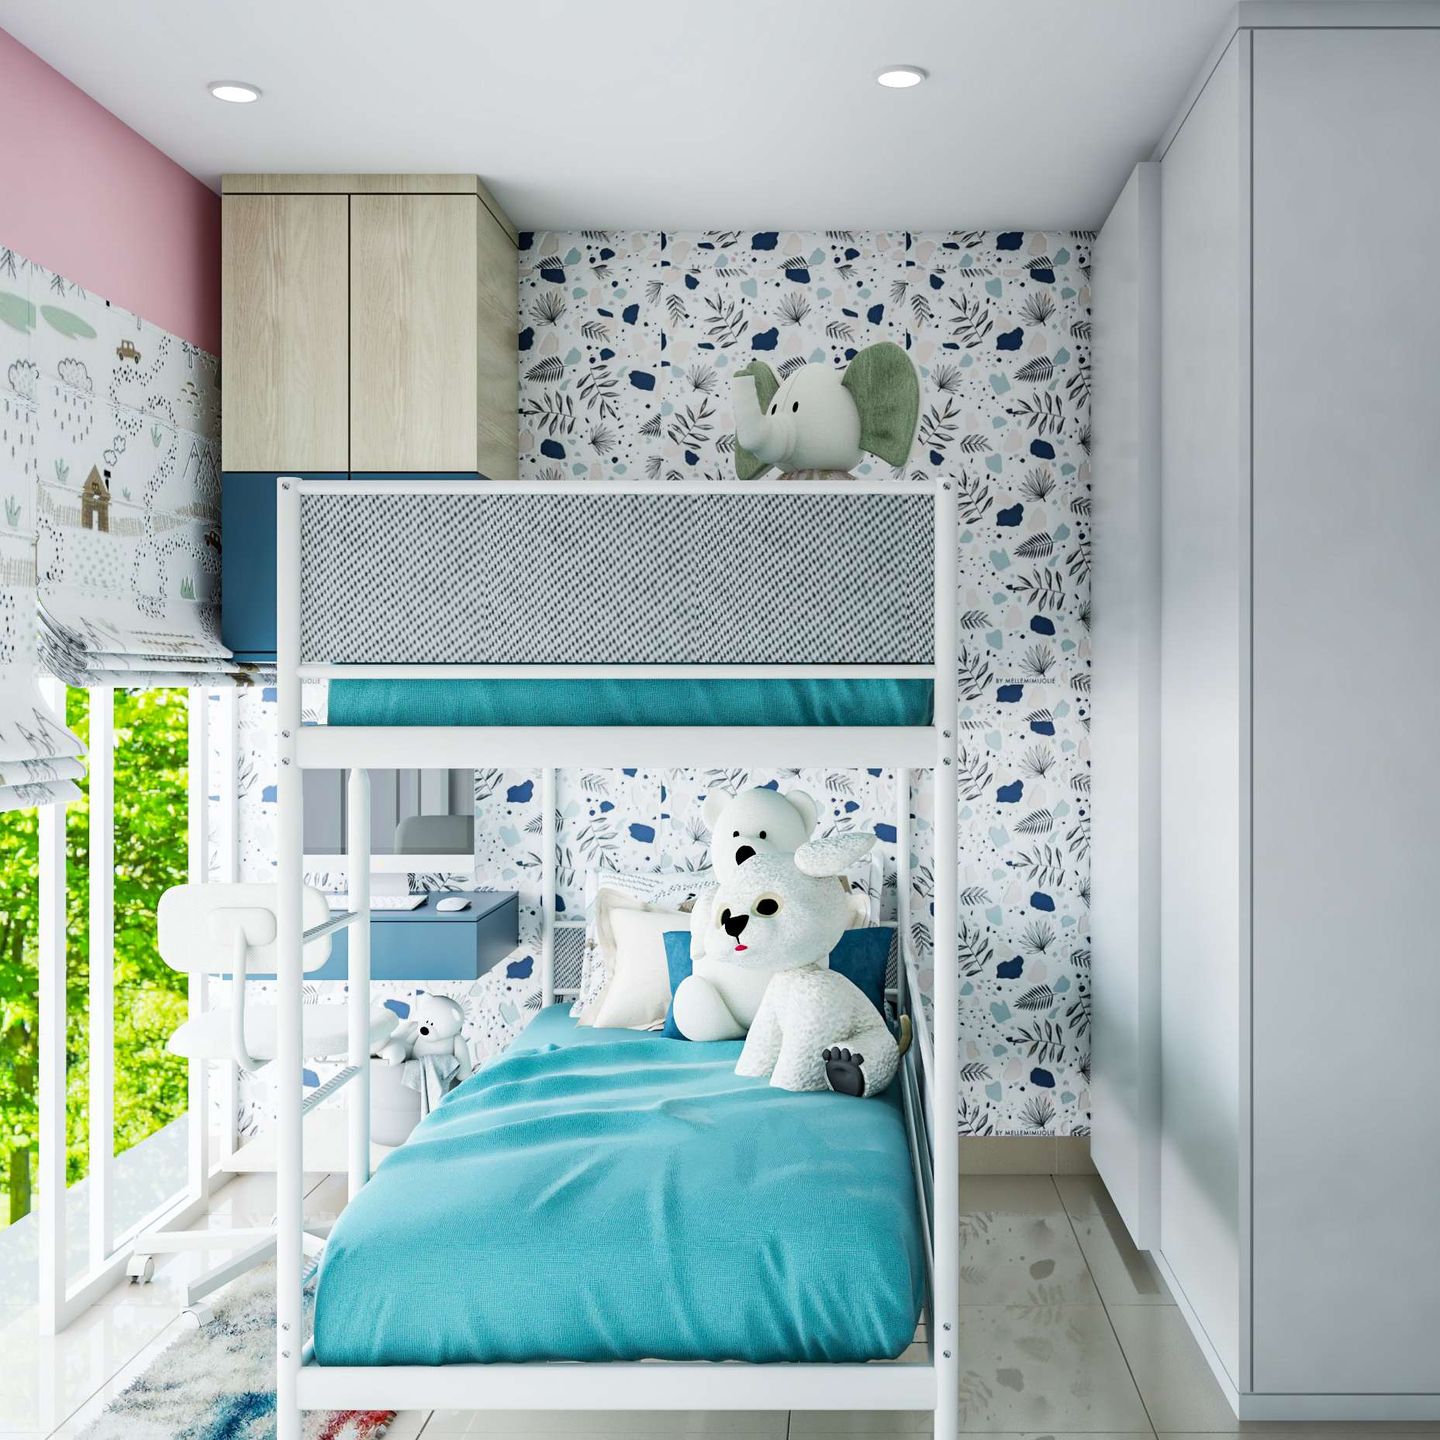 Modern Wall Design With A Durable Wallpaper